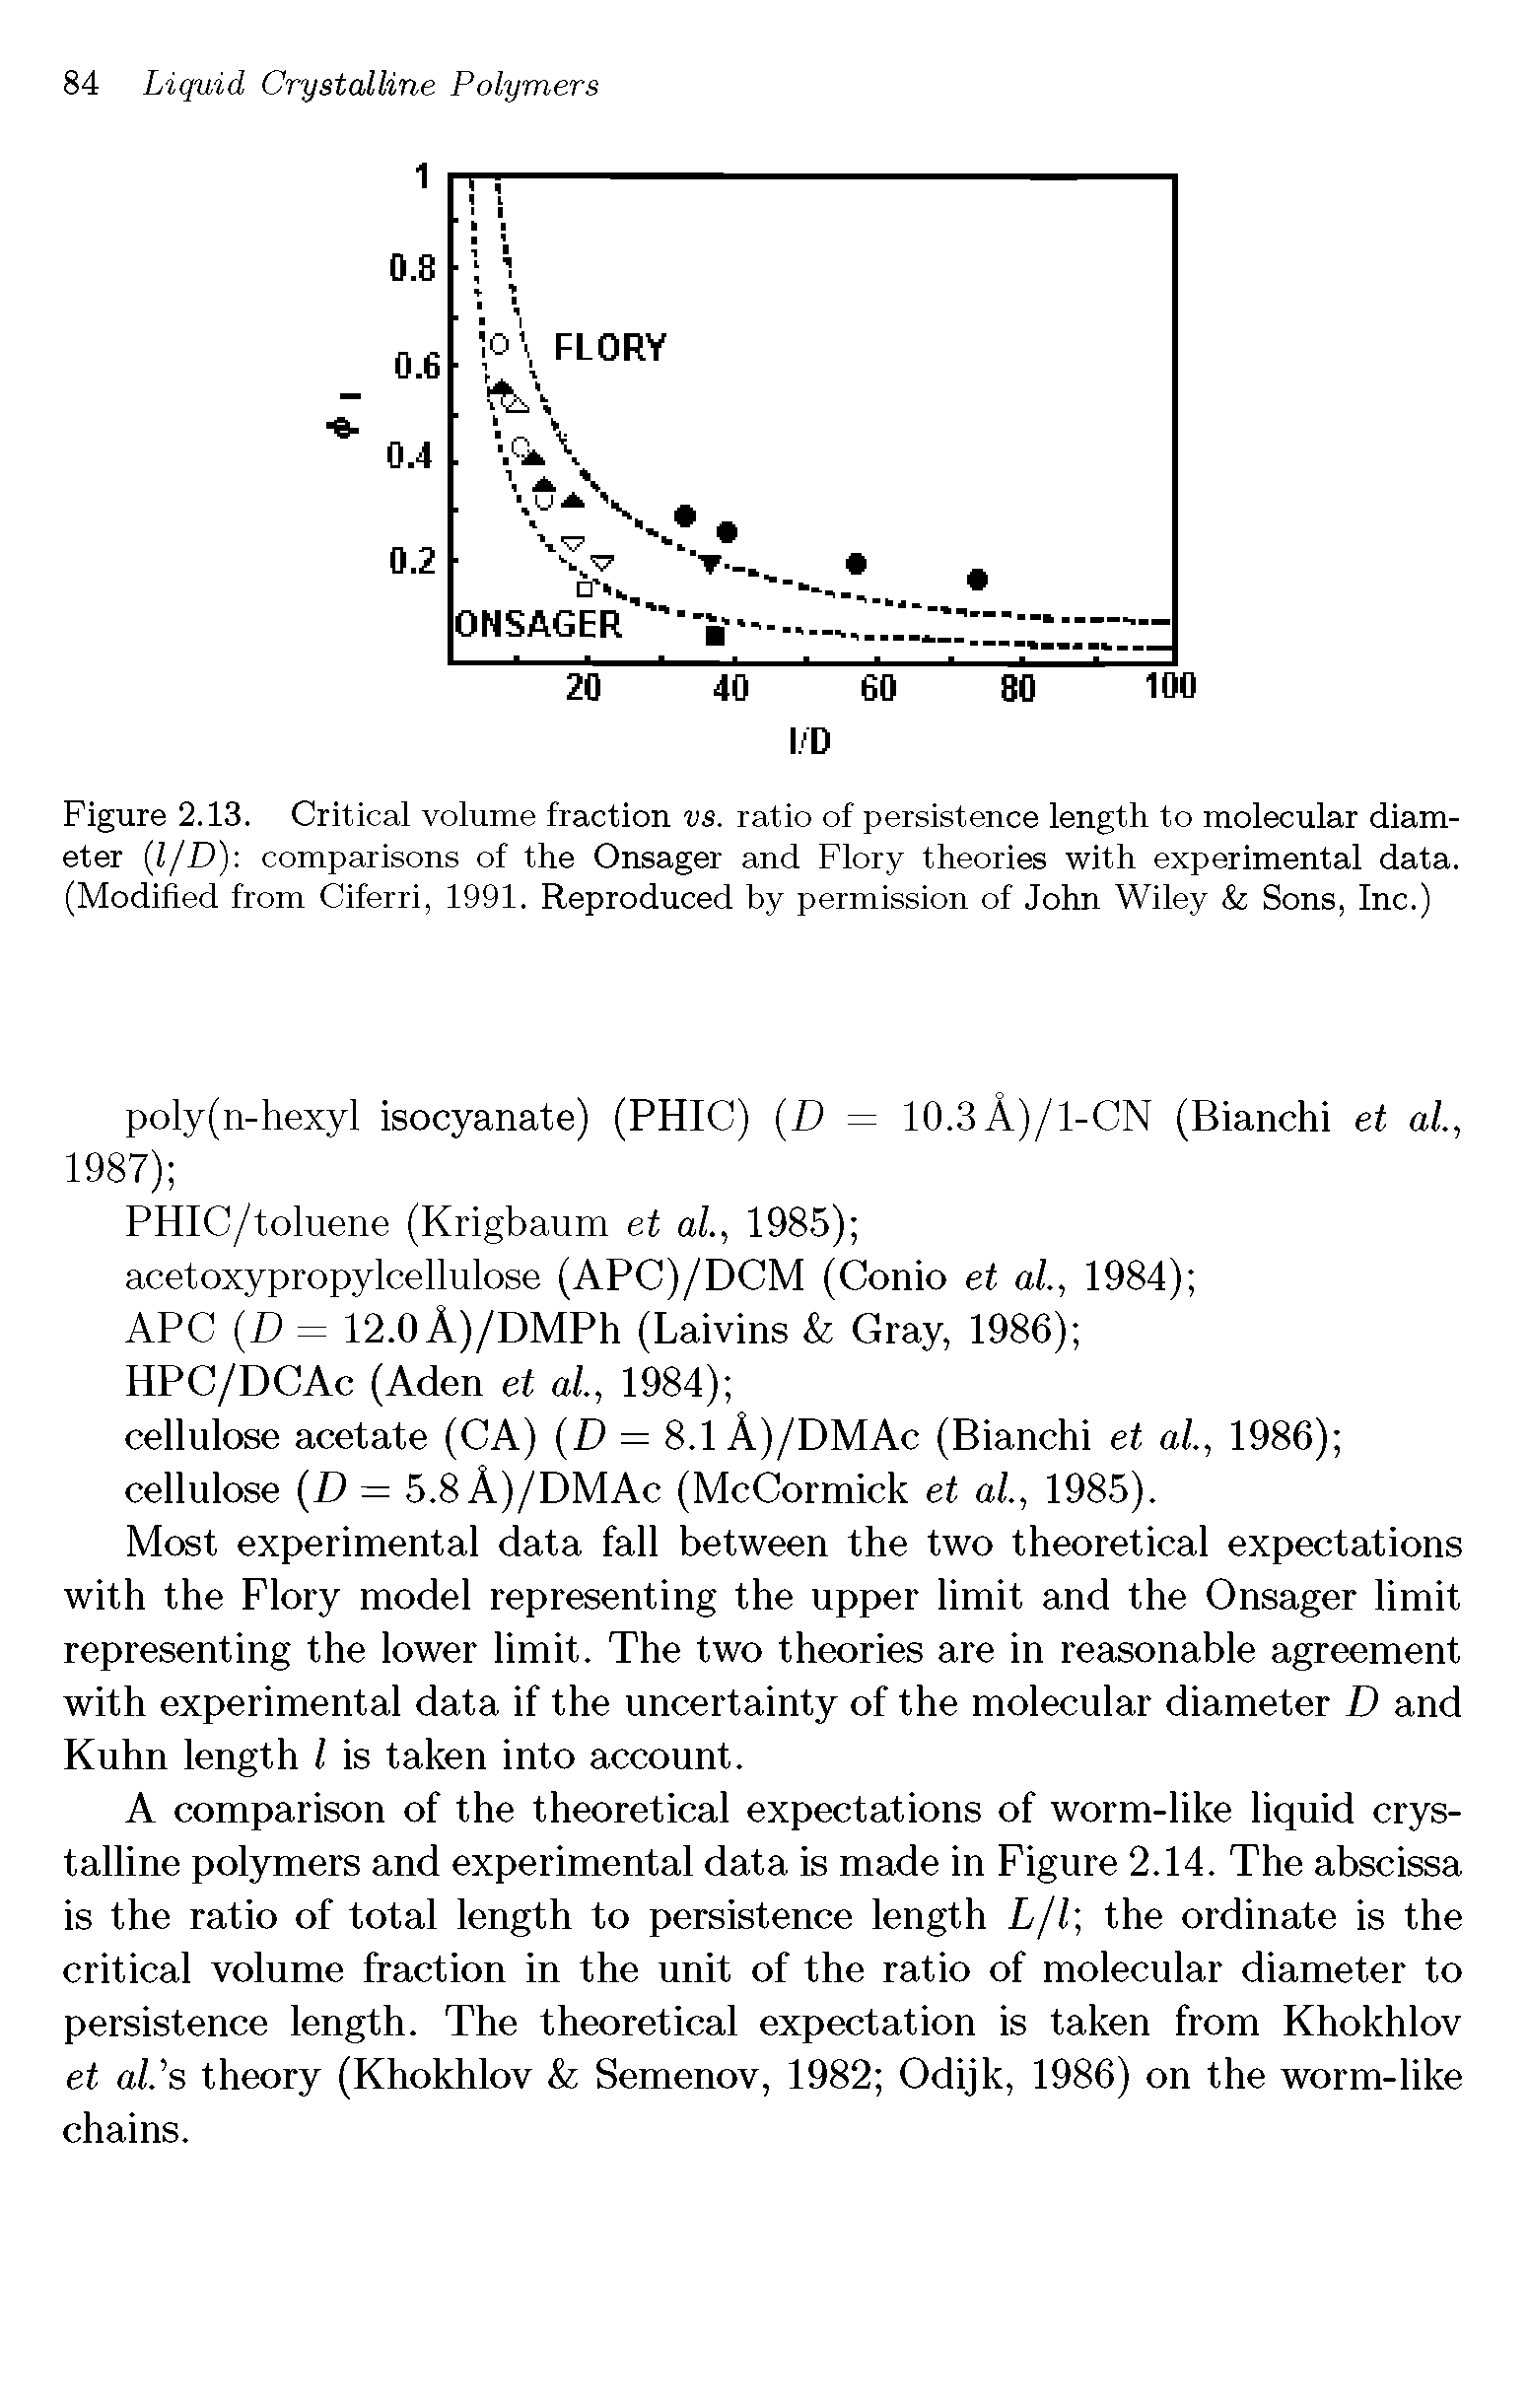 Figure 2.13. Critical volume fraction vs. ratio of persistence length to molecular diameter (l/D) comparisons of the Onsager and Flory theories with experimental data. (Modified from Ciferri, 1991. Reproduced by permission of John Wiley Sons, Inc.)...